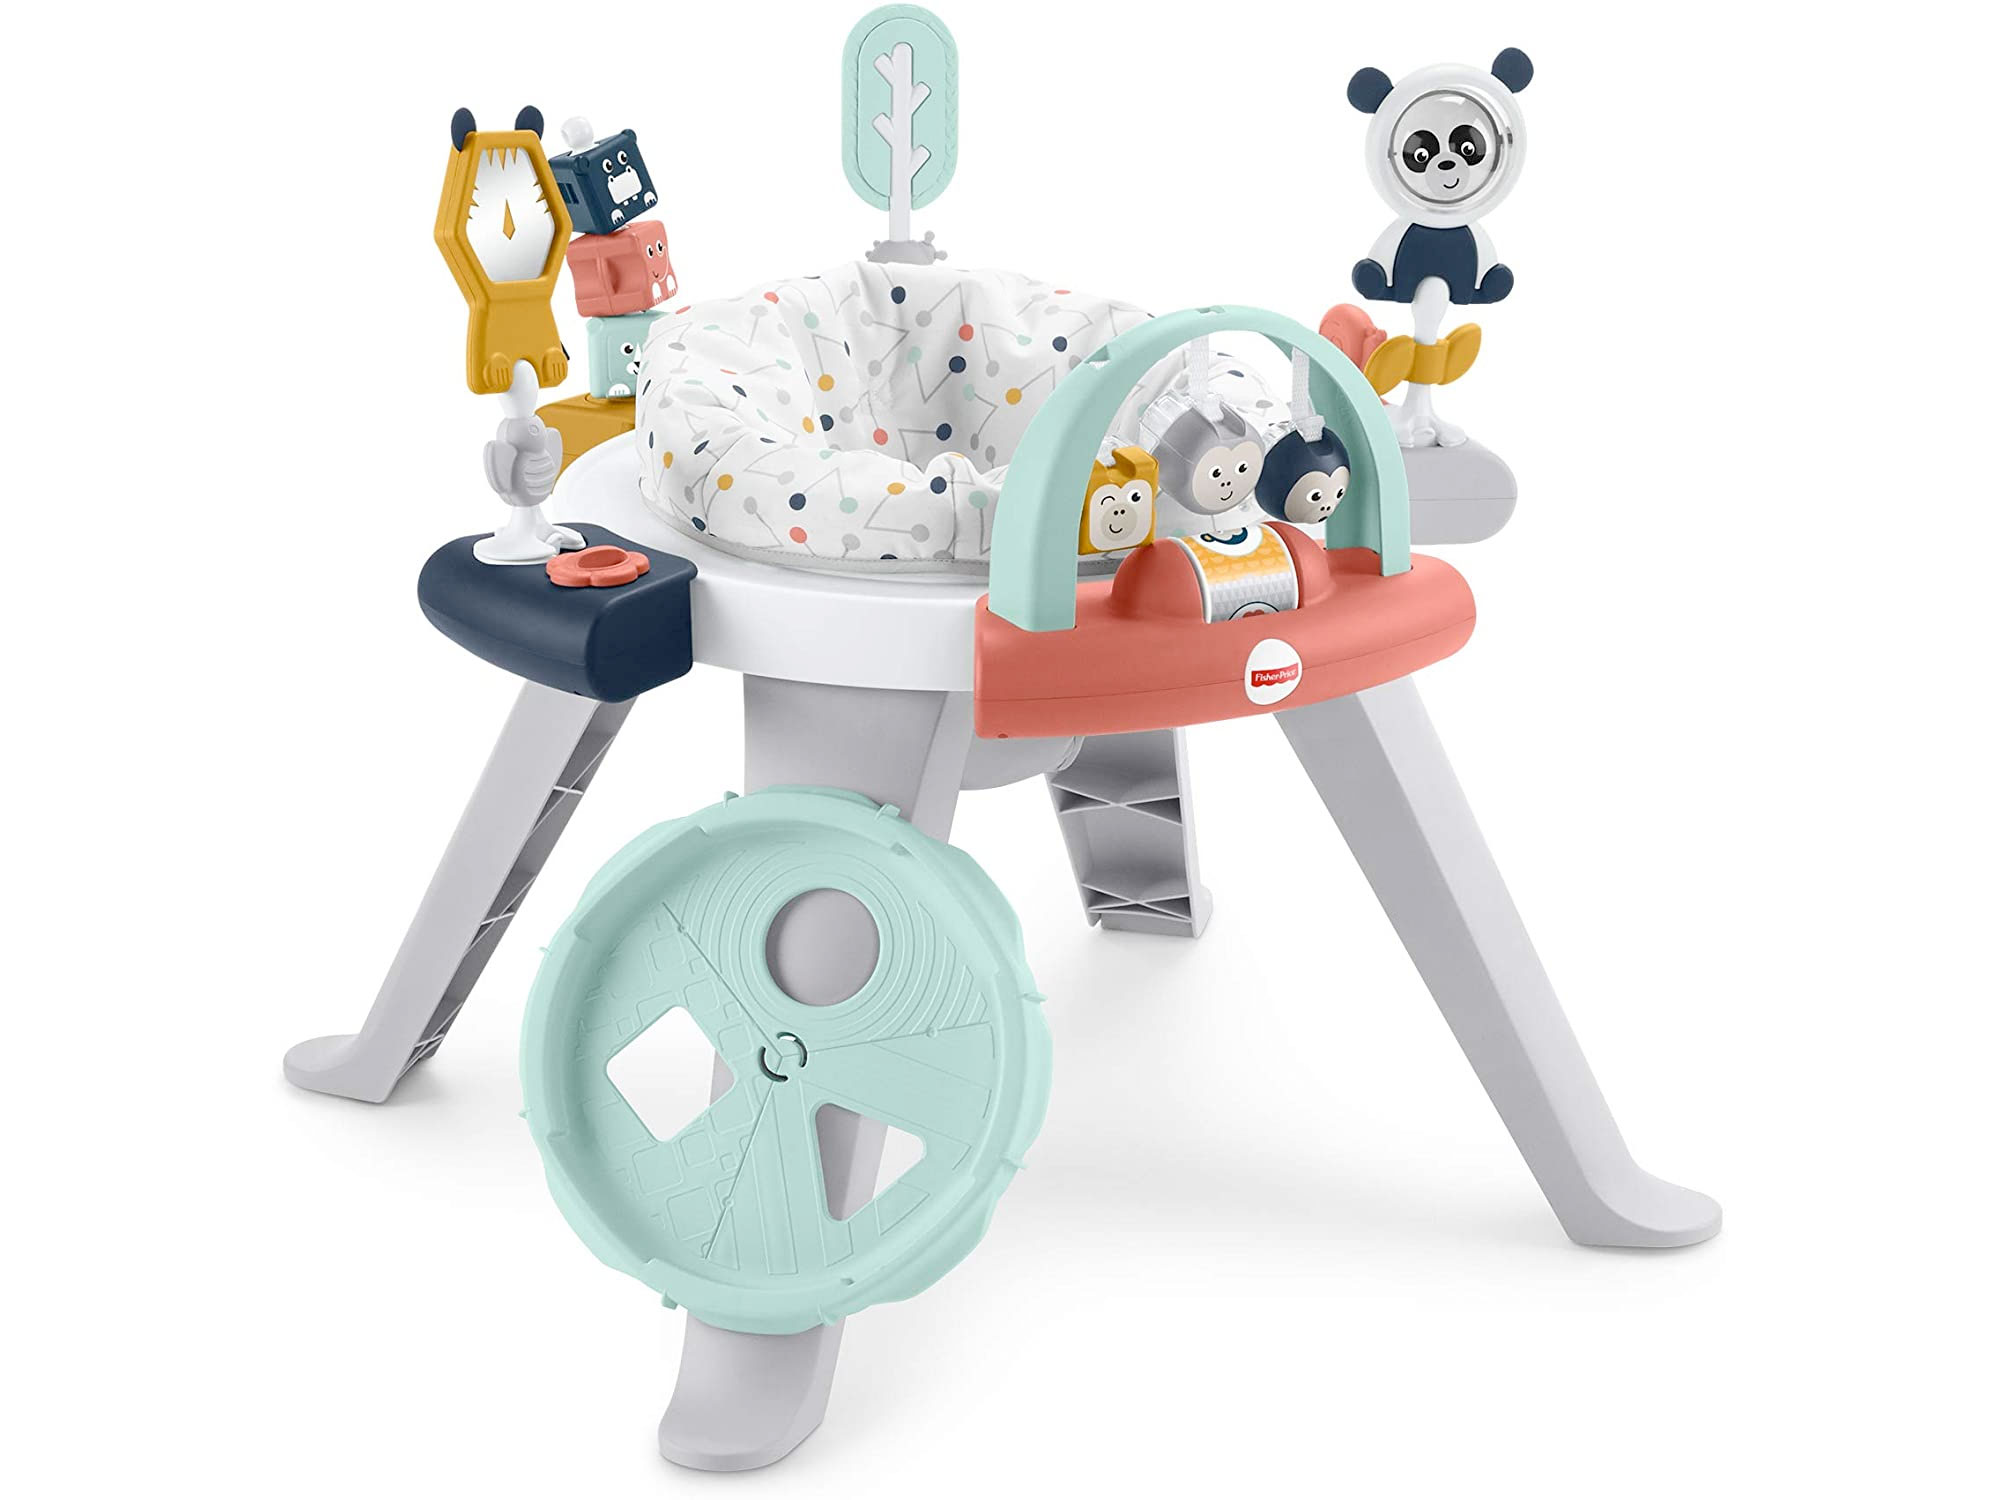 Amazon：Fisher-Price 3-In-1 Spin & Sort Activity Center只賣$48.98